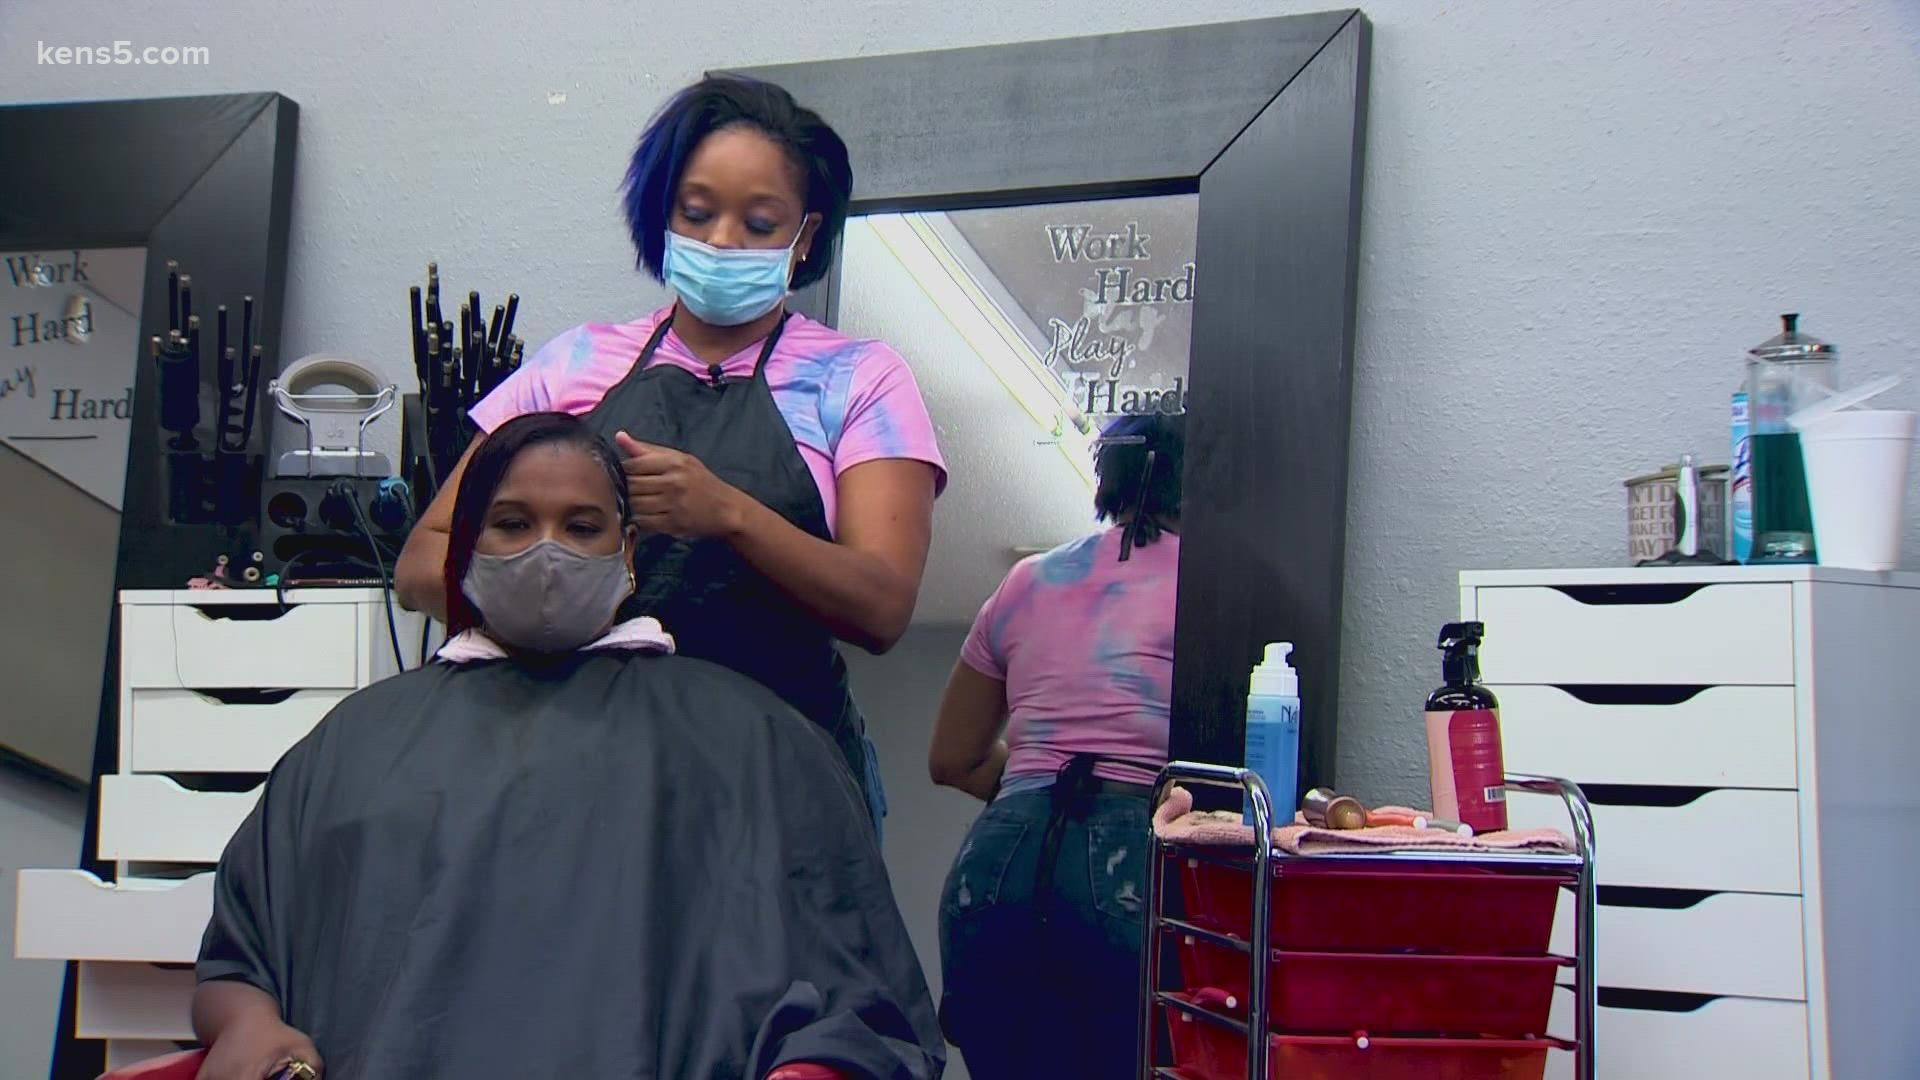 One stylist in San Antonio is hoping to teach the next generation valuable skills about entrepreneurship along with opening her own beauty school.